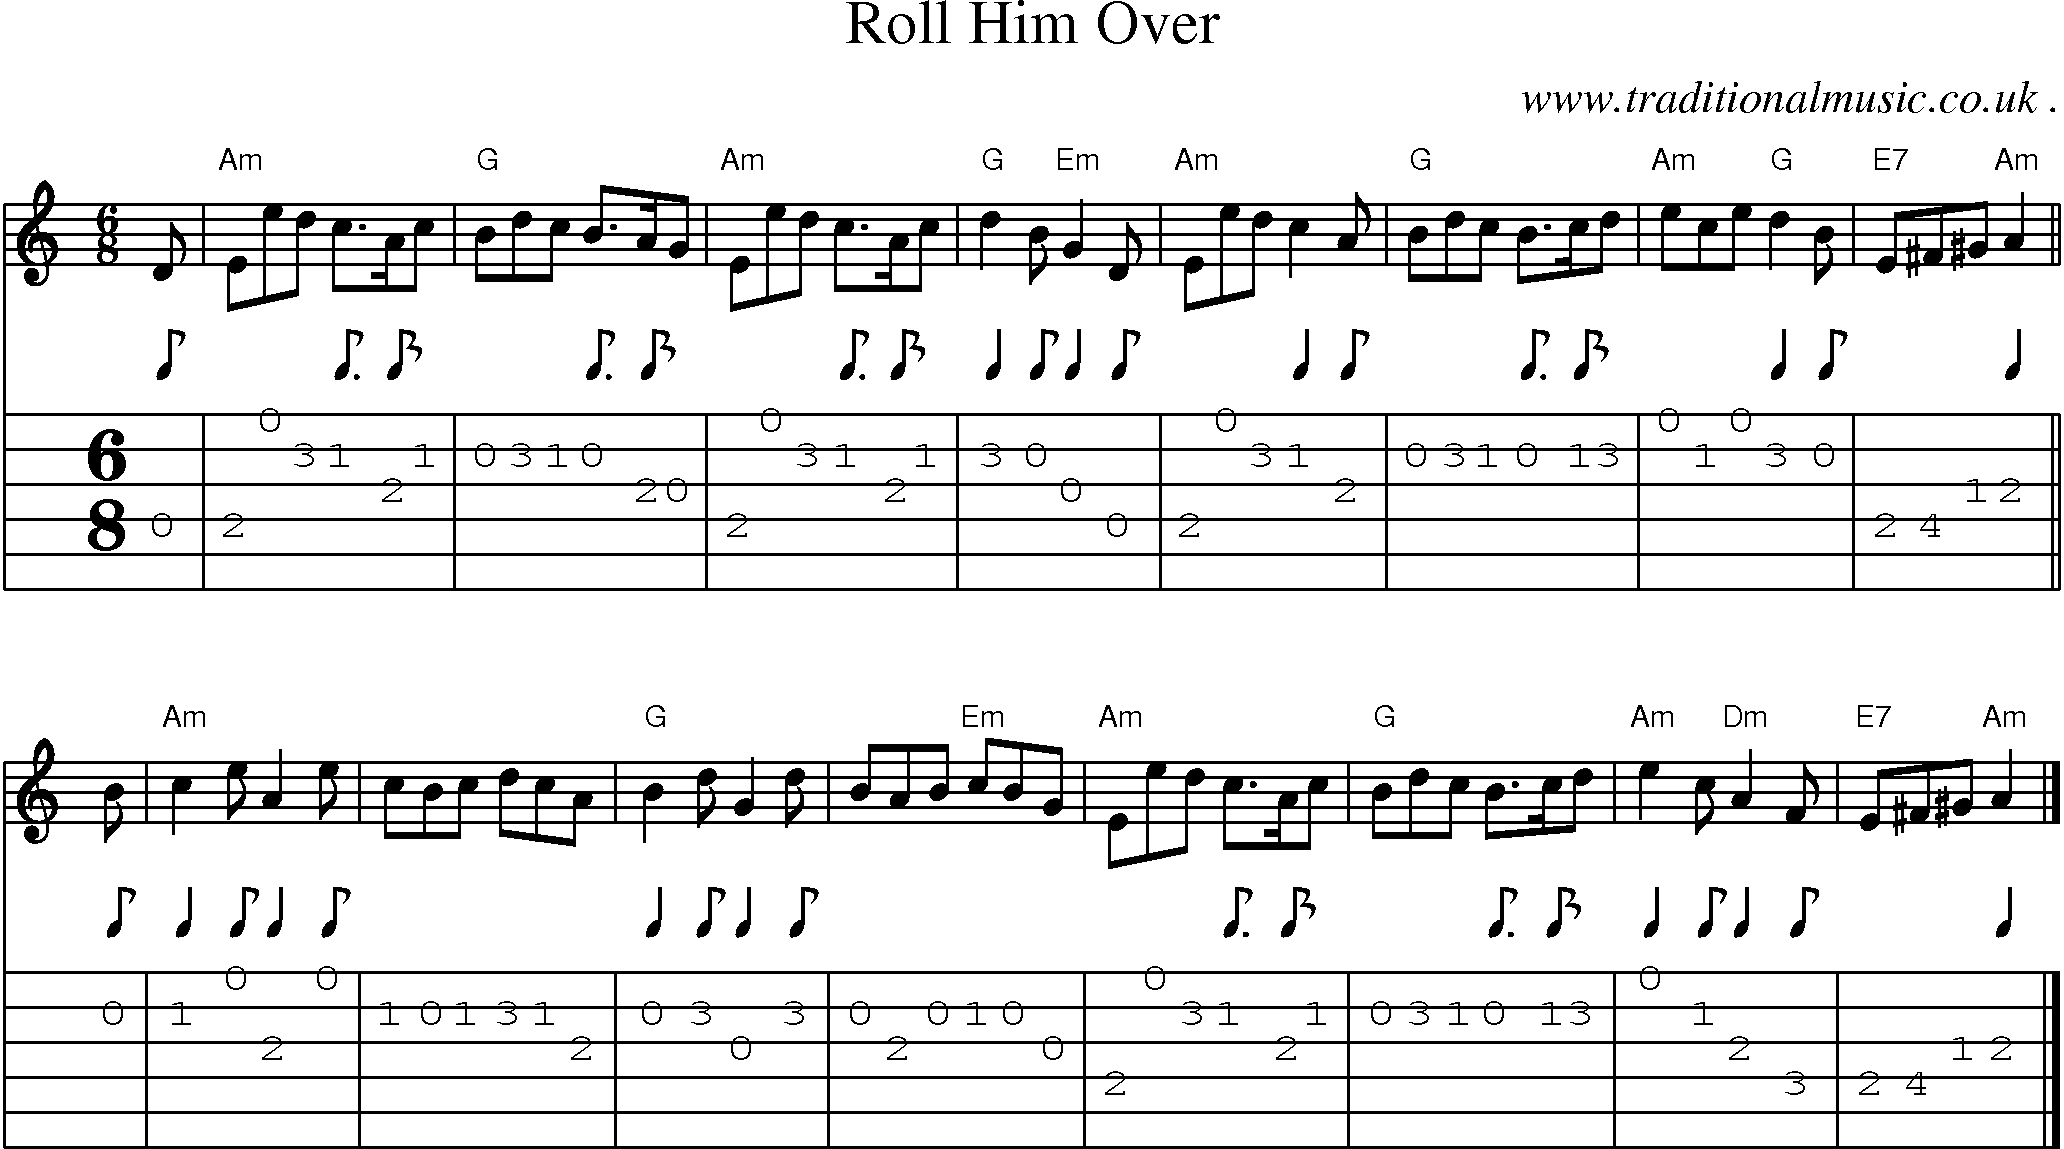 Sheet-music  score, Chords and Guitar Tabs for Roll Him Over